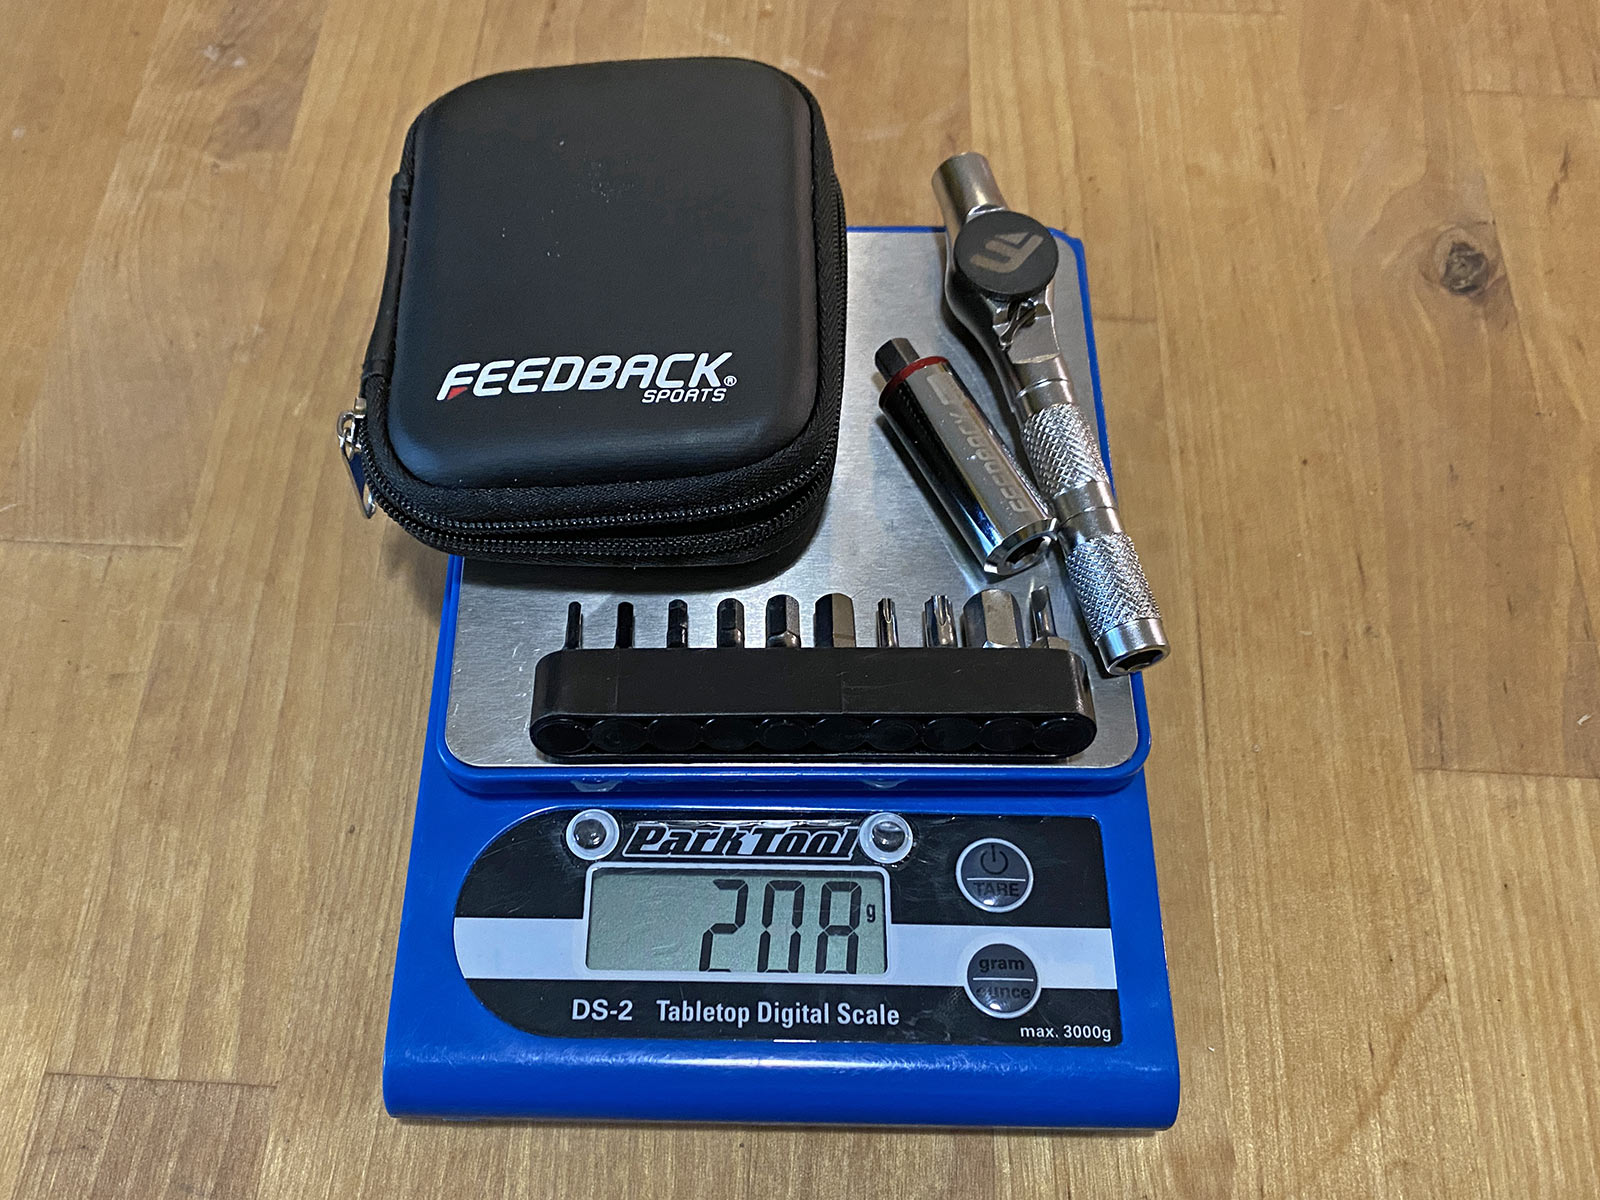 Reflex Fixed Torque Ratchet kit for portable repairs, 208g actual weight